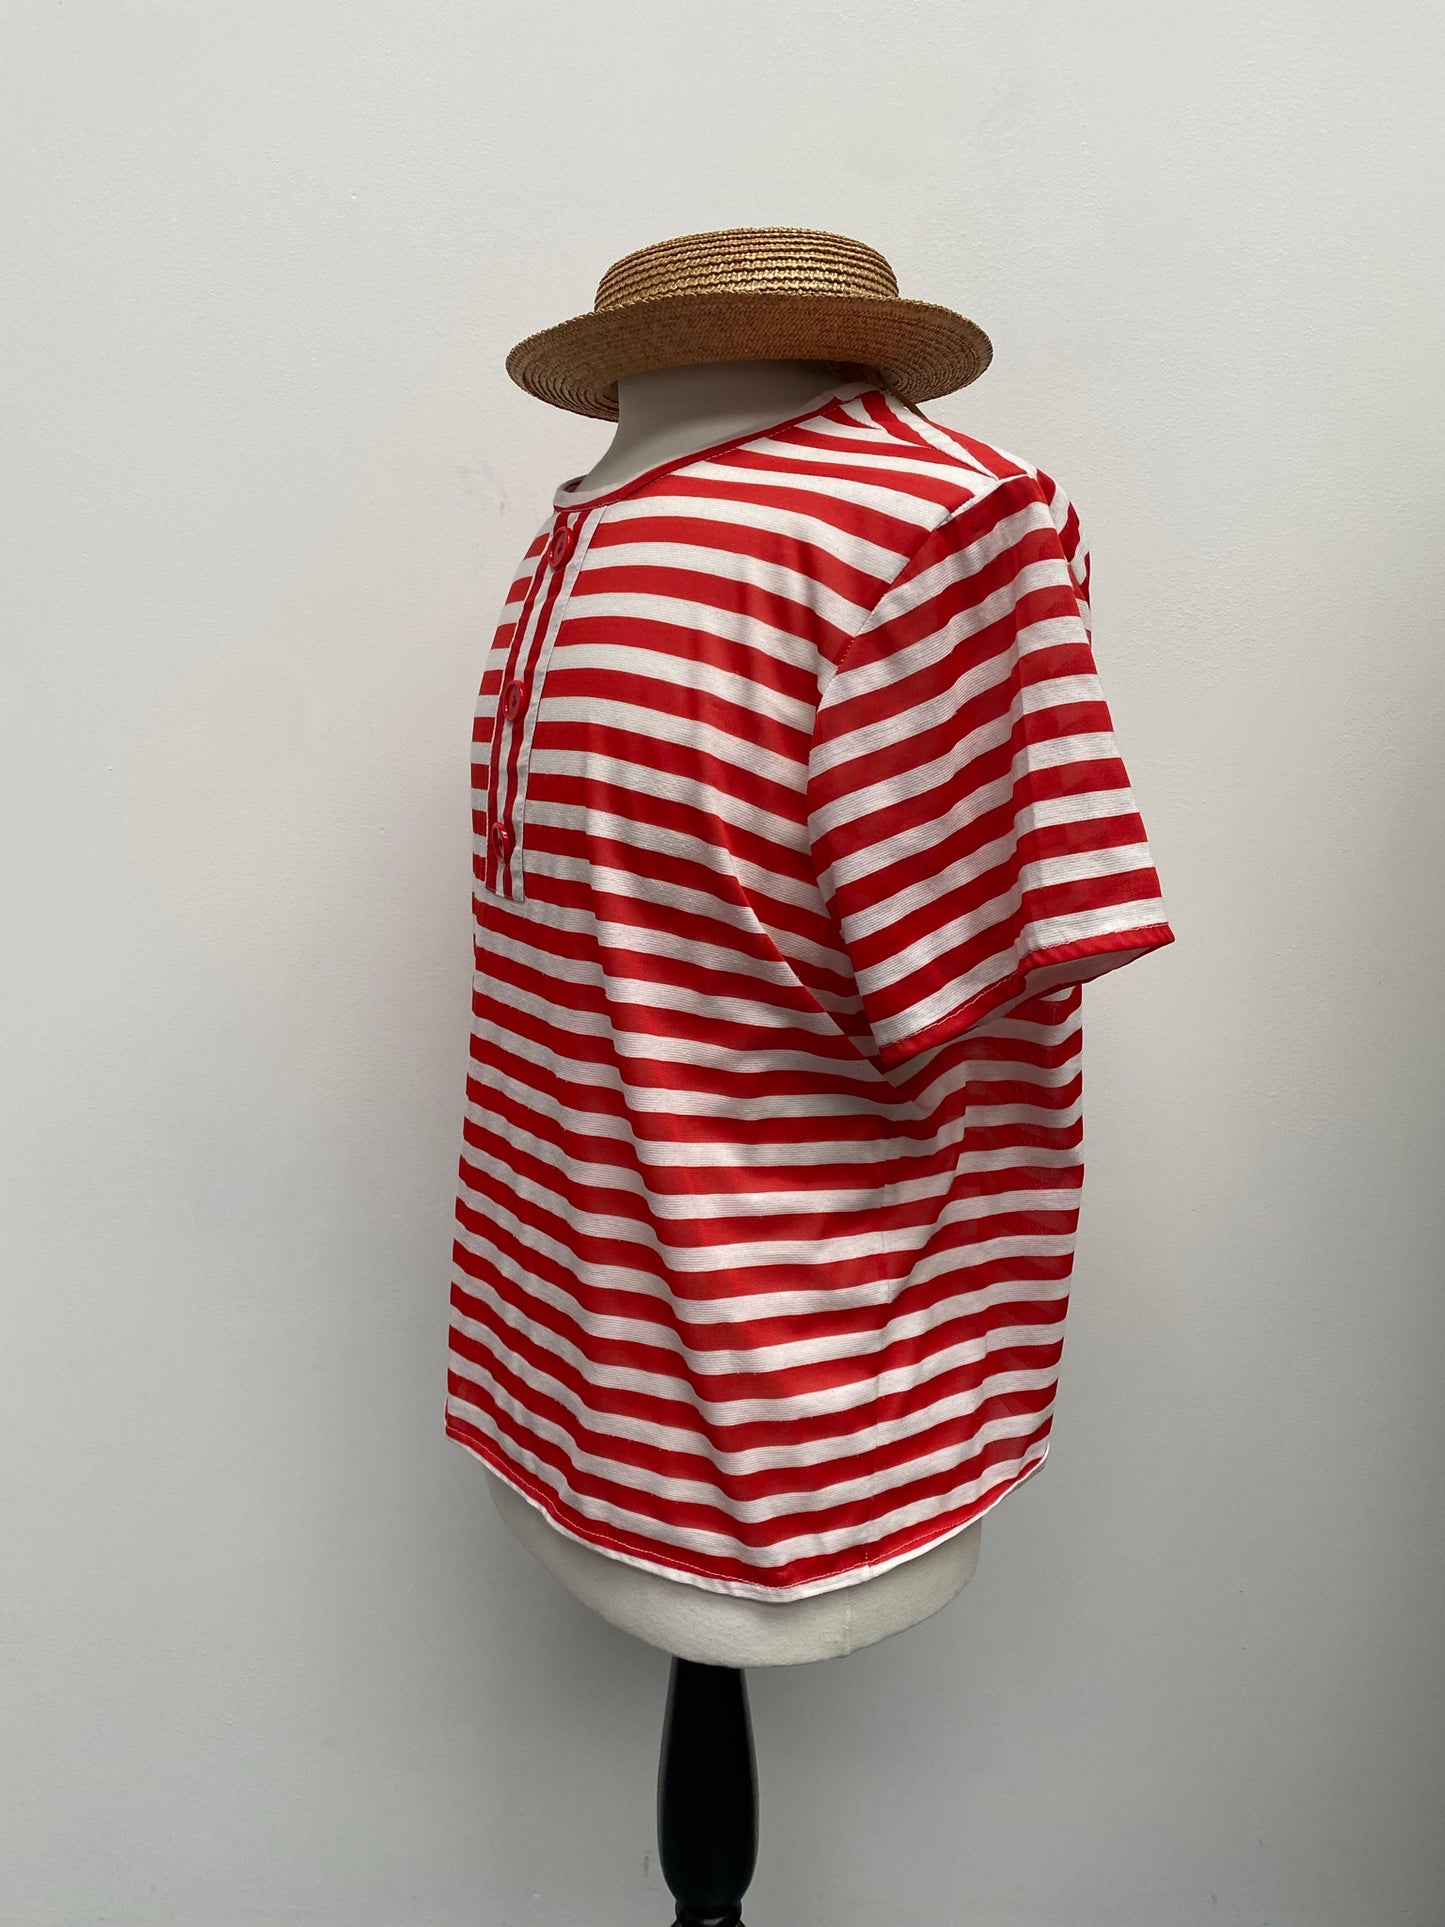 Red Old Time Striped Bathing Suit & Hat One Size - Ex Hire Fancy Dress Costume